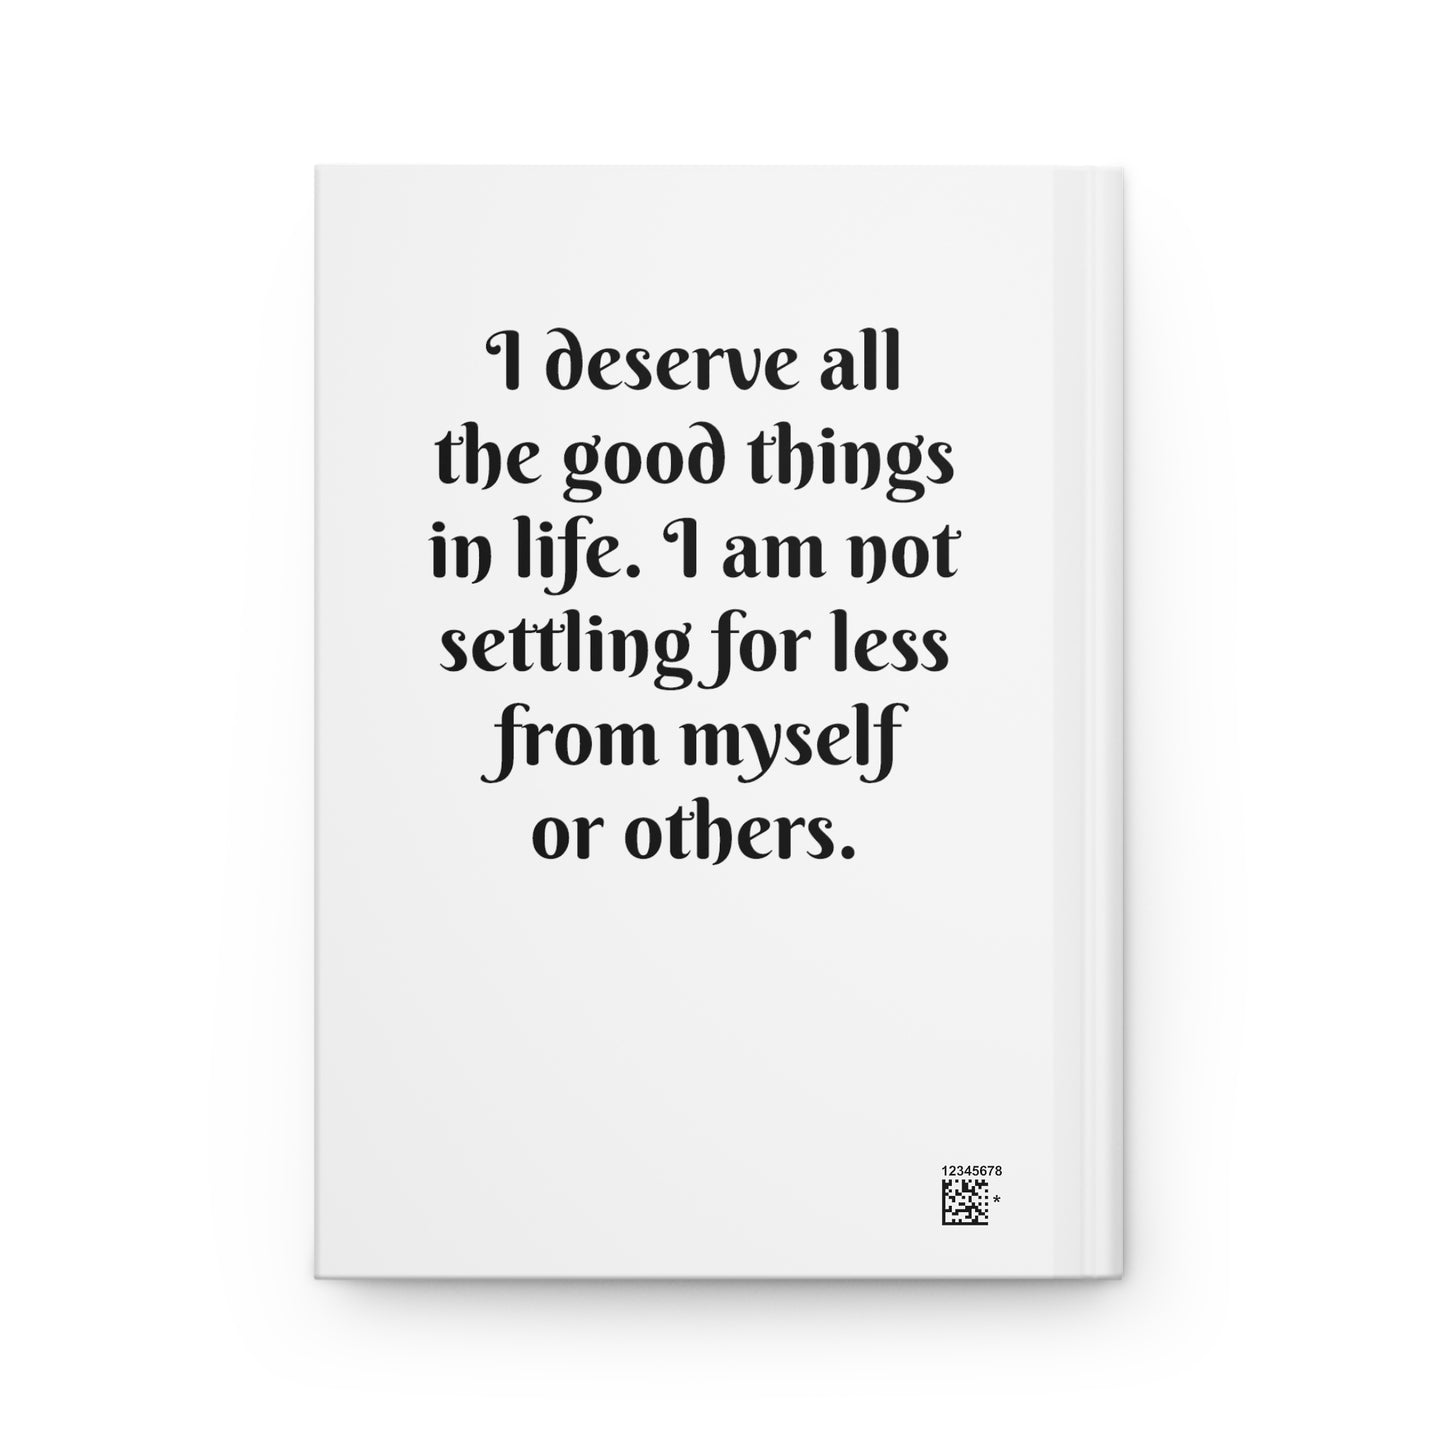 His Royalty- Affirmations Hardcover Journal Matte